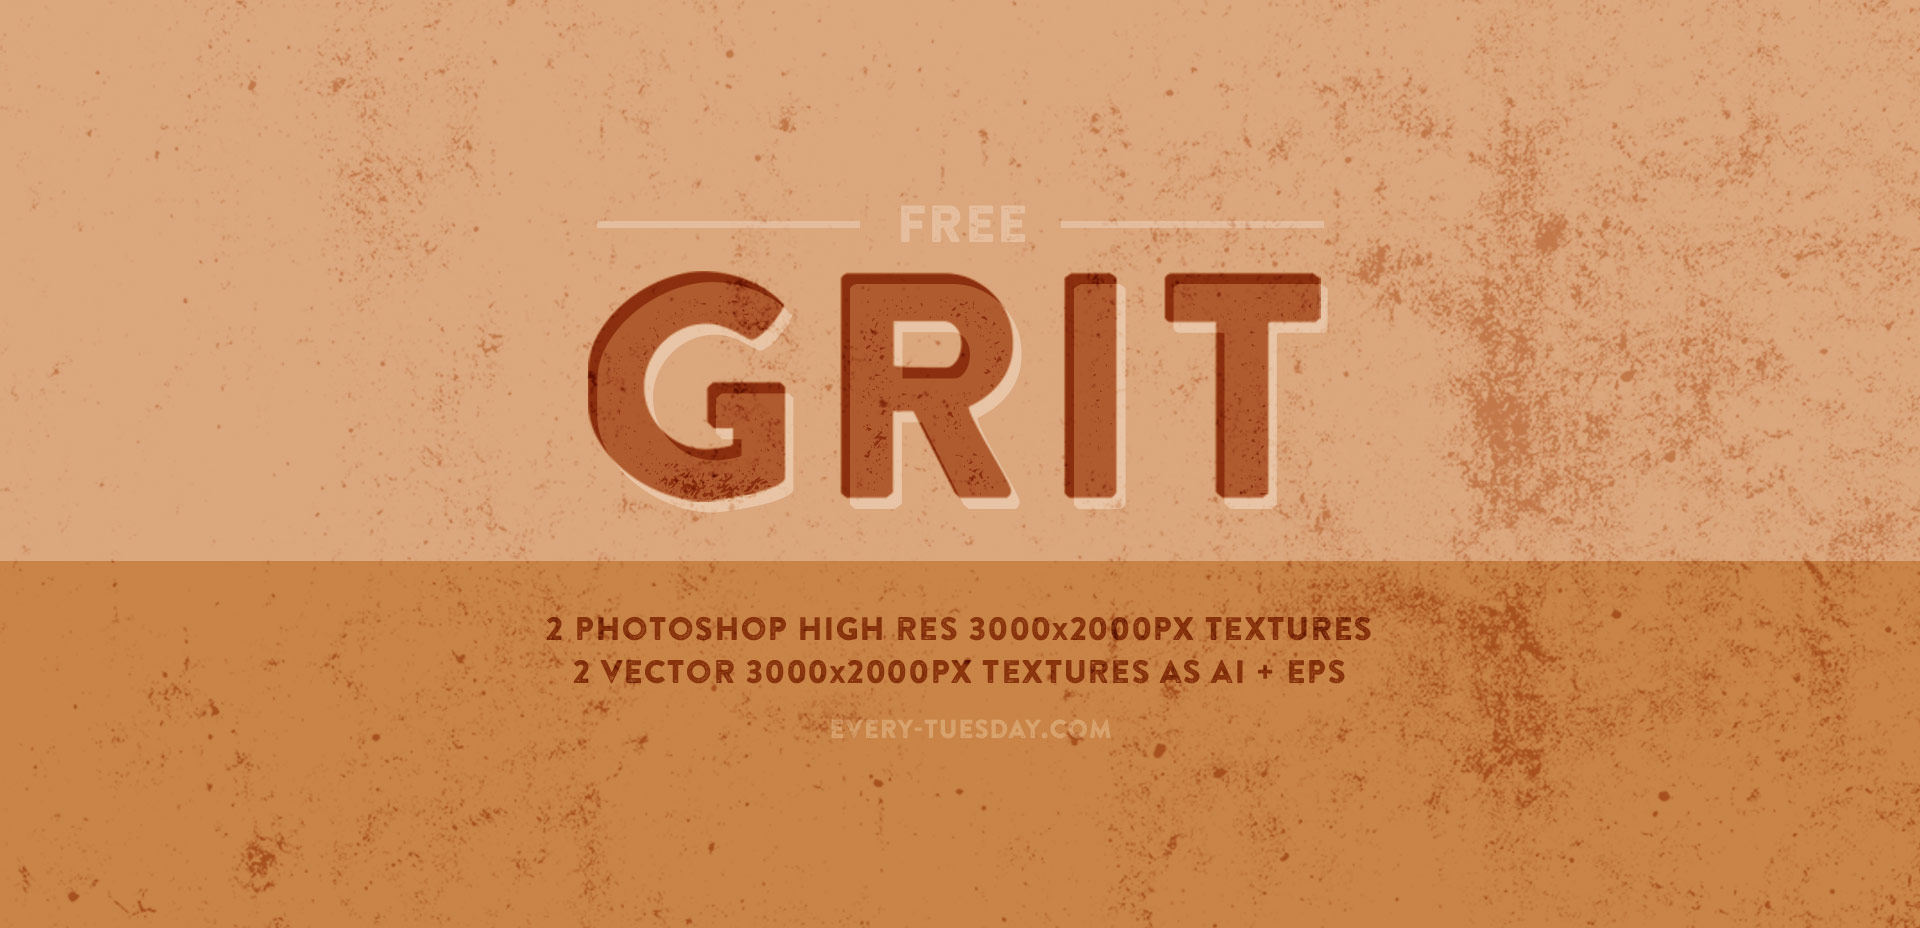 free vector and raster grit textures